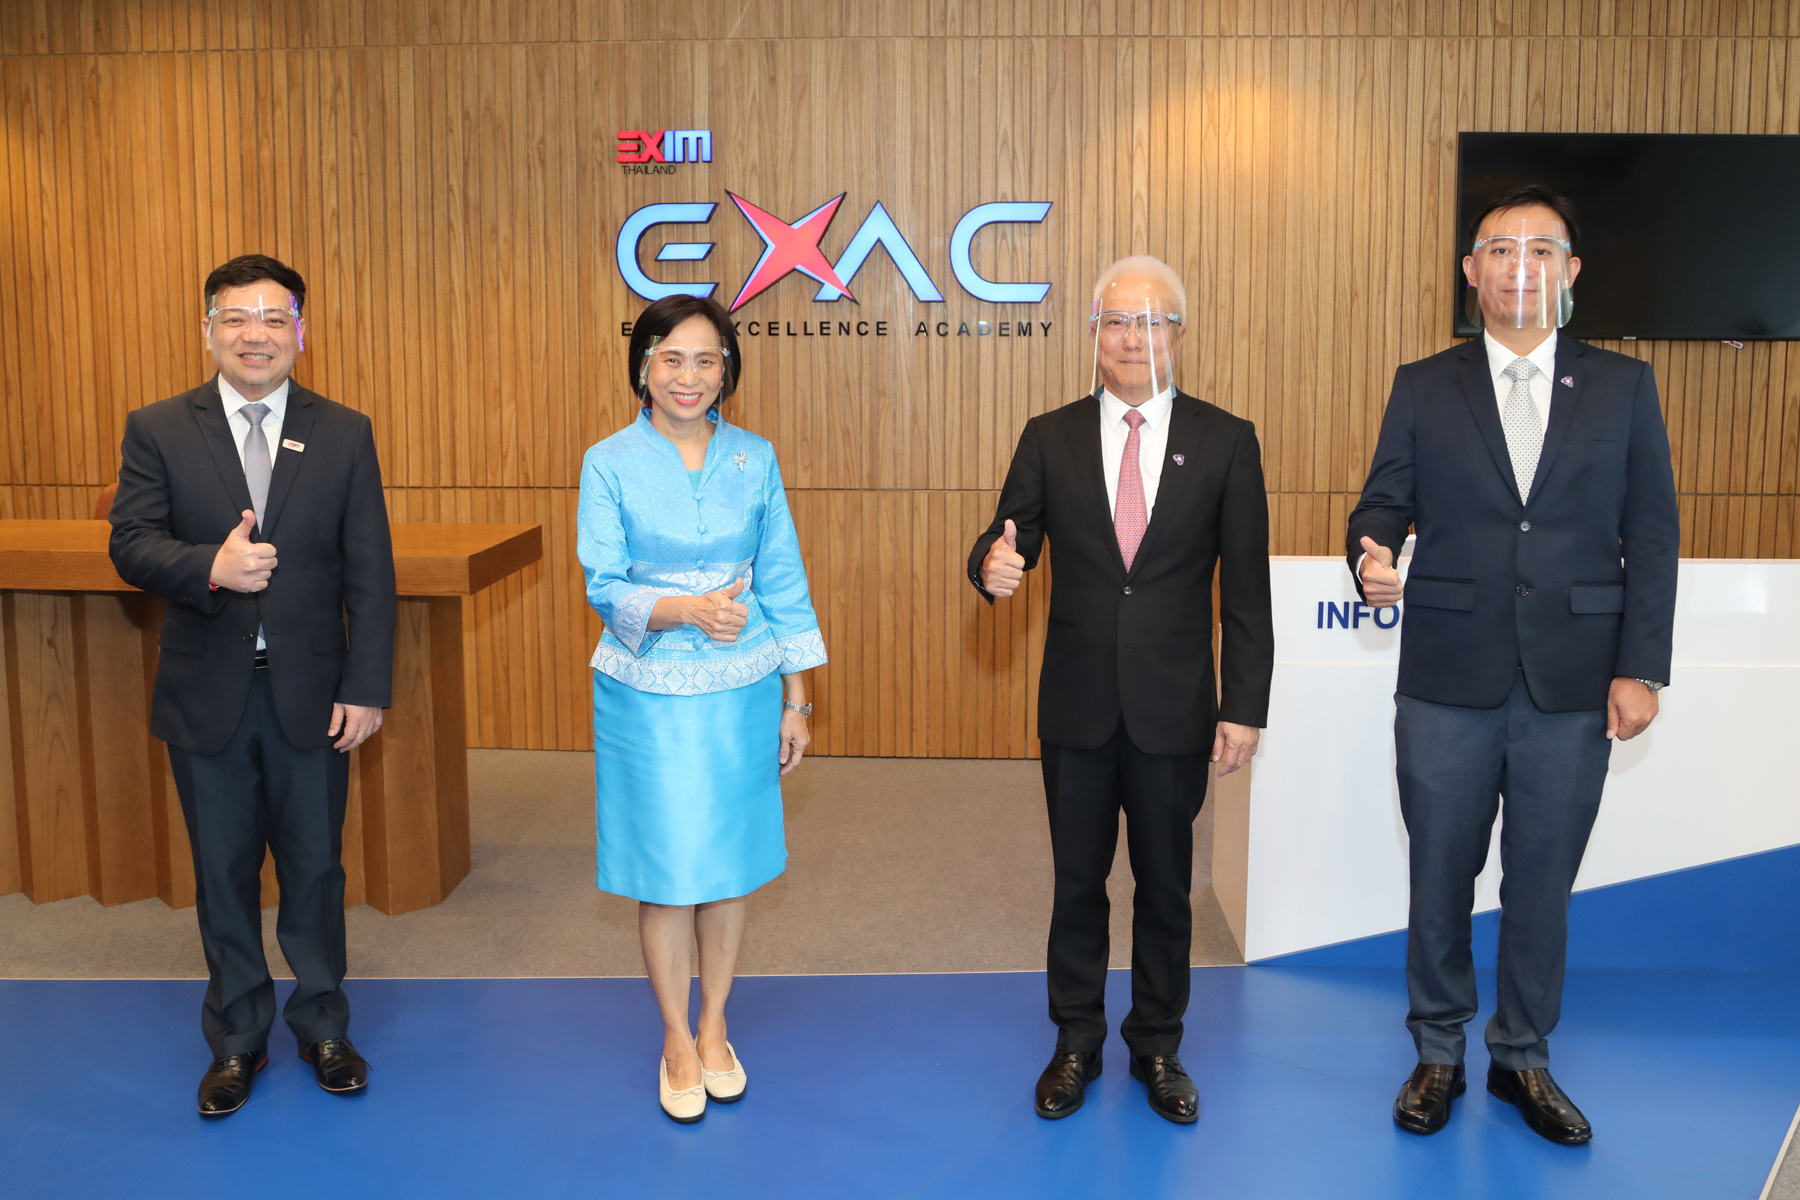 EXIM Thailand Holds Online Advisory Program to Help SMEs Develop Export Business Plans for Post-COVID-19 China Market Penetration